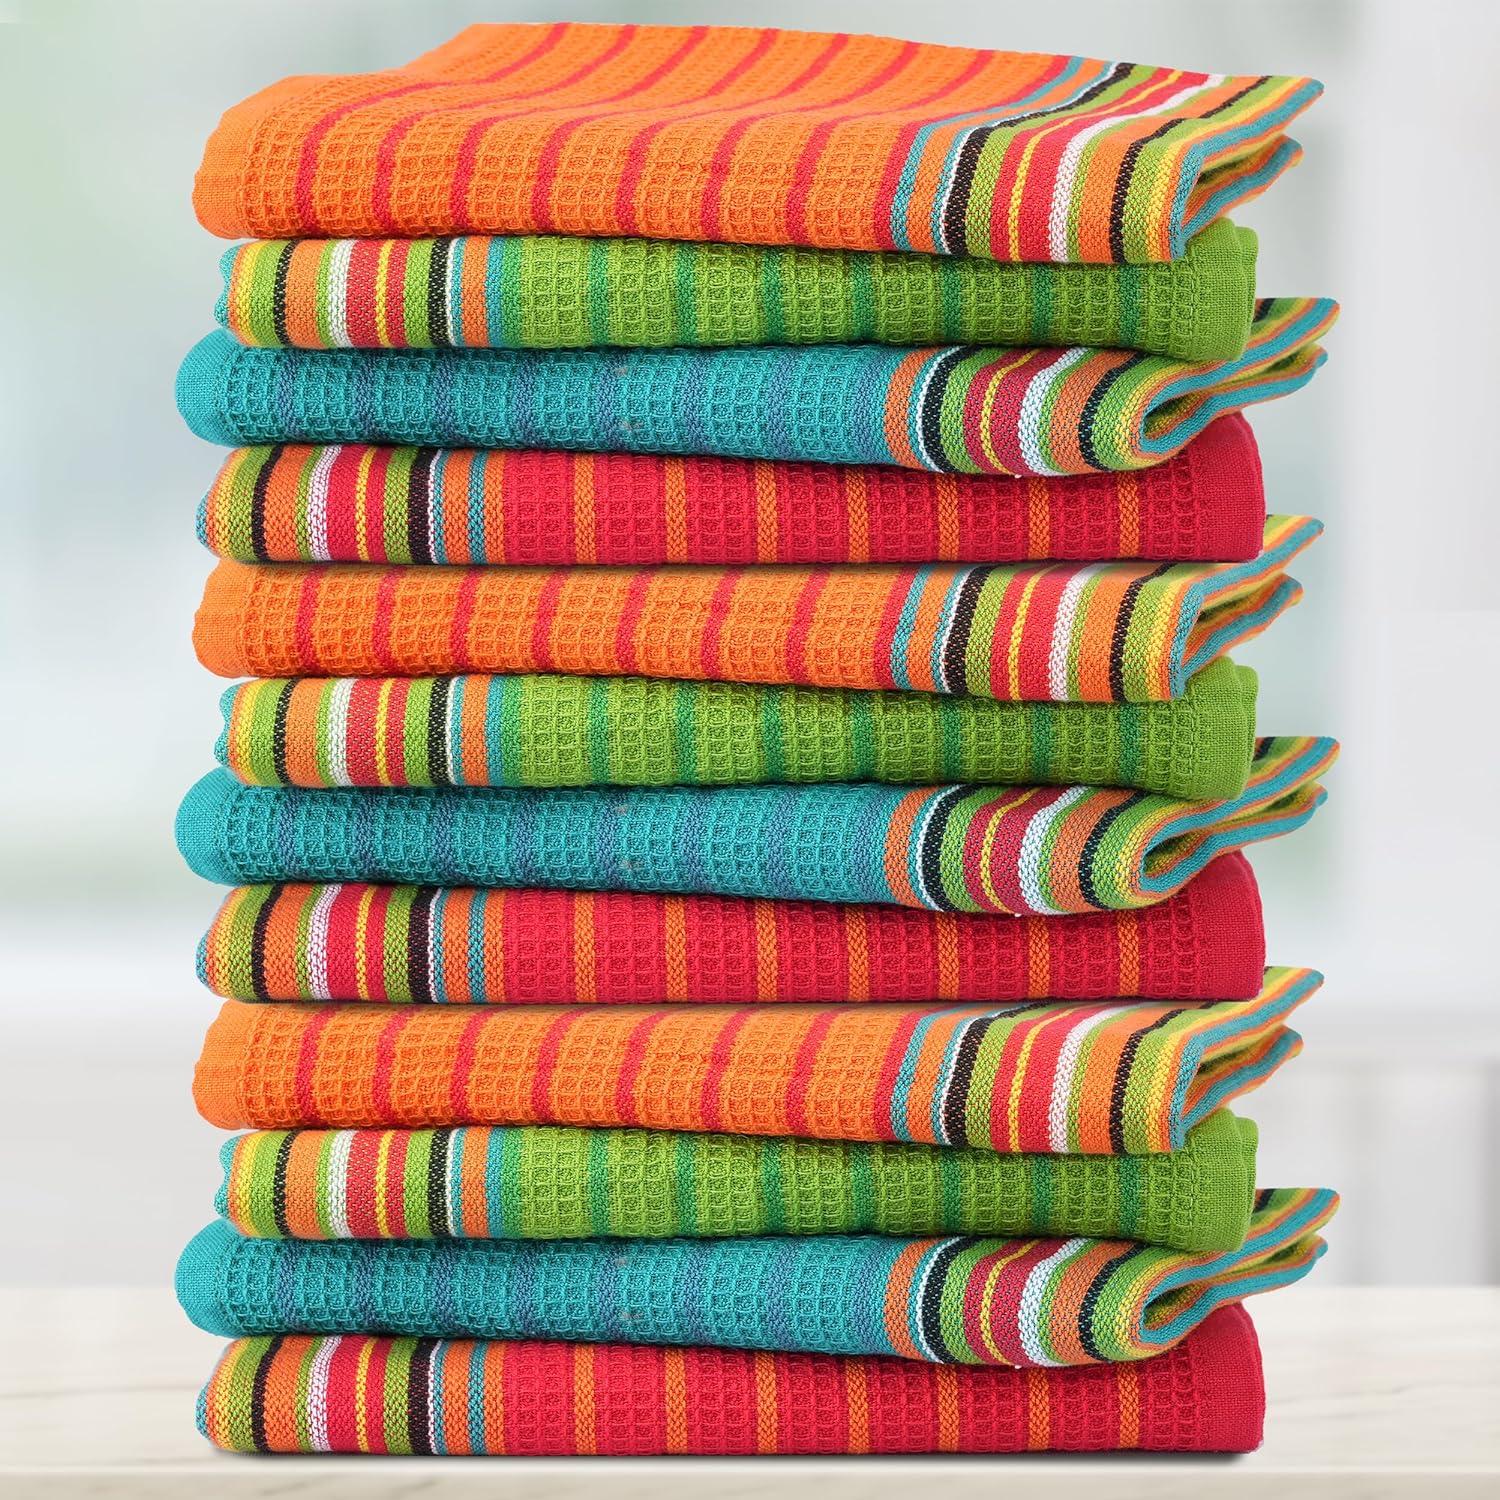 THREAD SPREAD Kitchen Dish Towels, 100% Cotton Salsa Towels, Set of 12 (16x28 Inches), Multi Purpose Cooking Drying Restaurant Bar Cleaning Cloth Napkin, Highly Absorbent, Lint Free (Red & Orange)